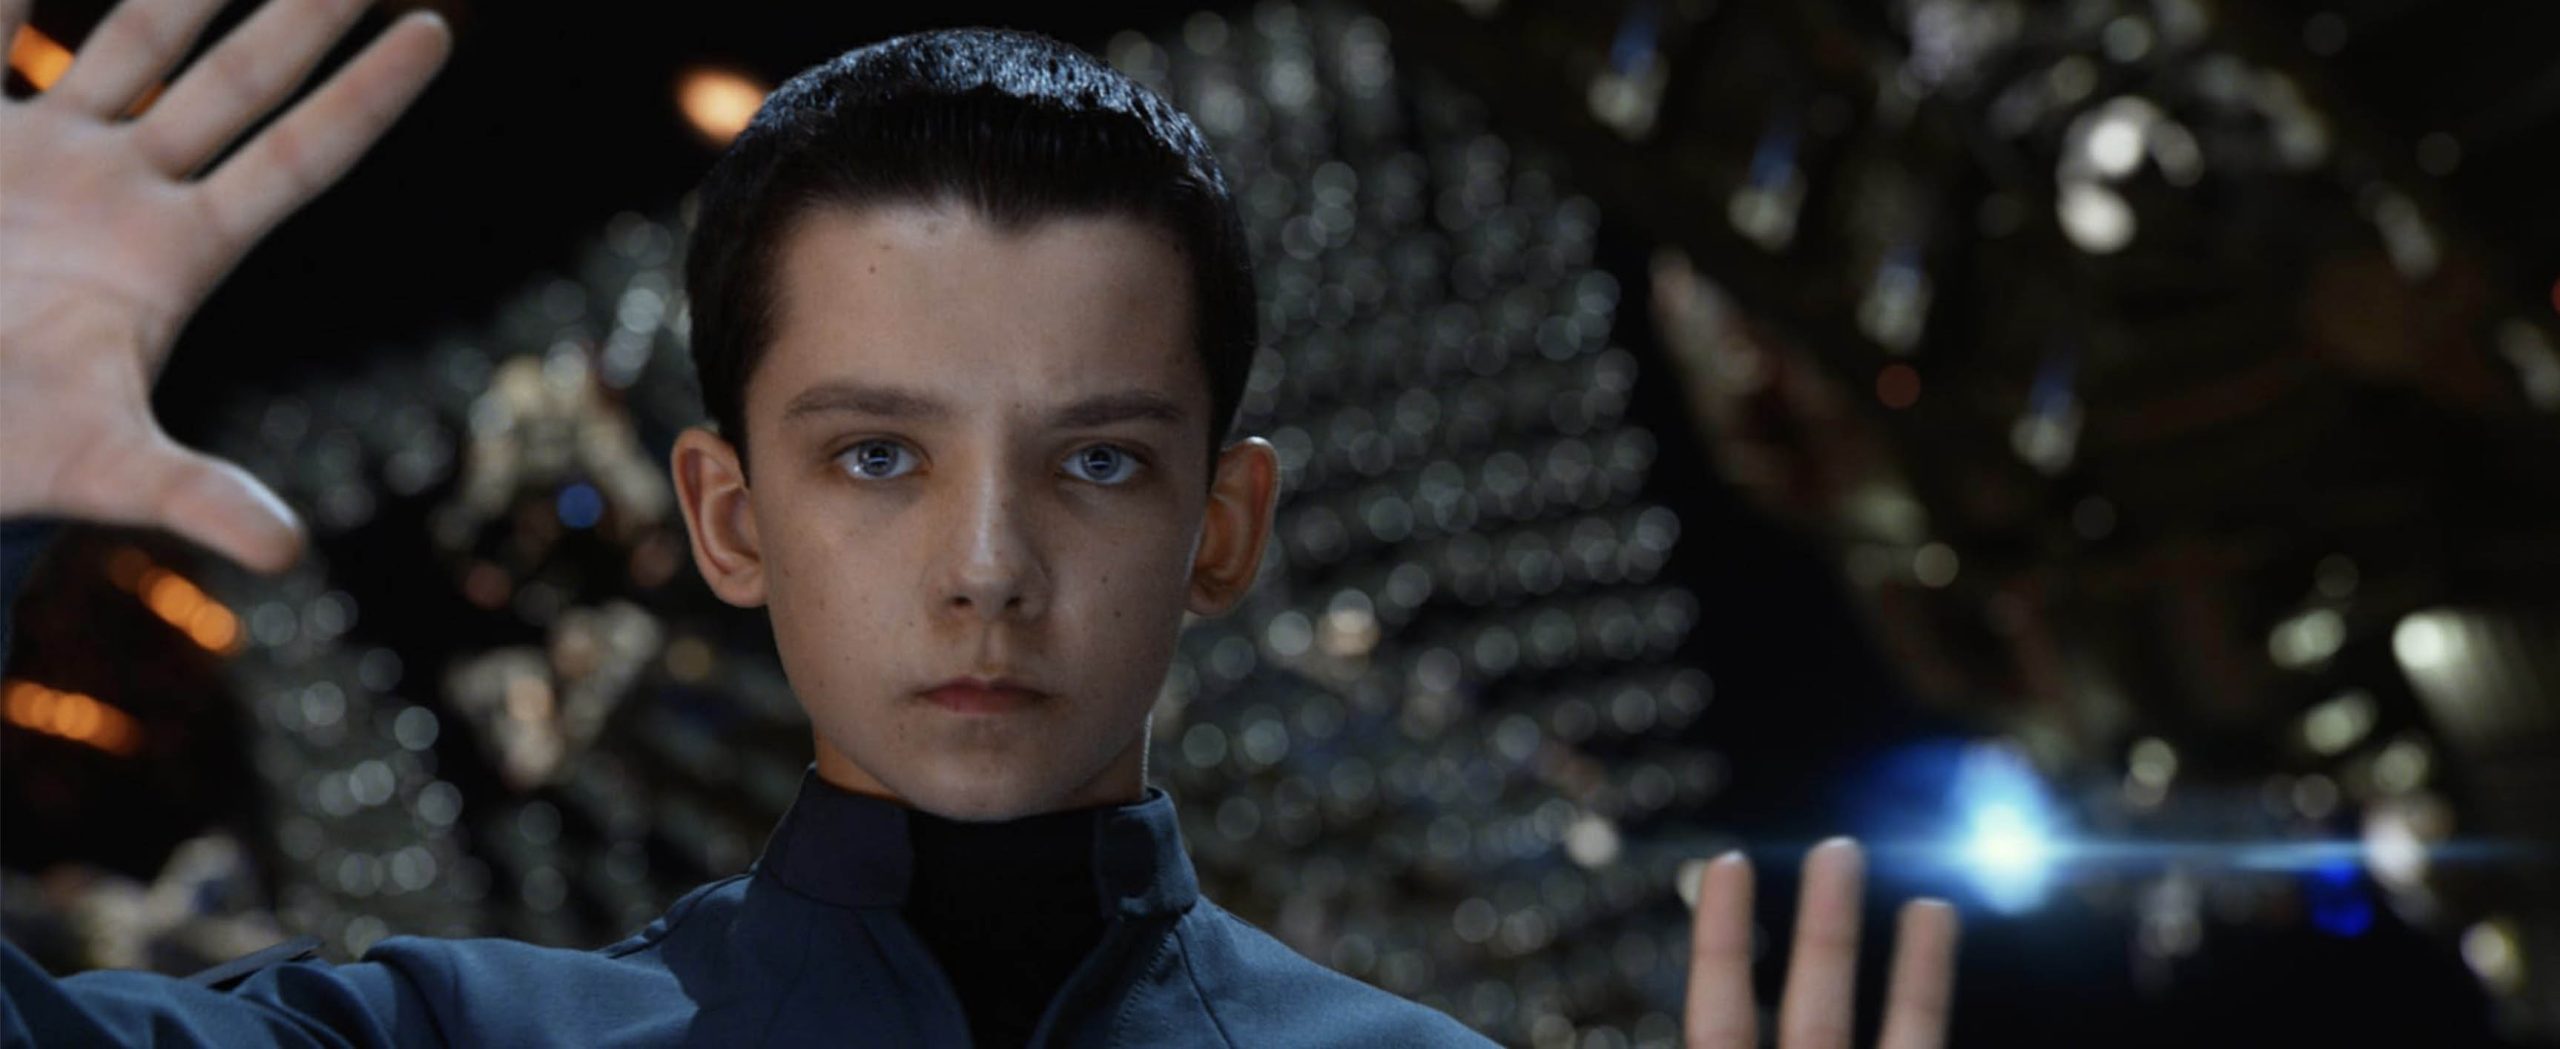 Ender's Game starring Asa Butterfield - Photo Summit Entertainment 